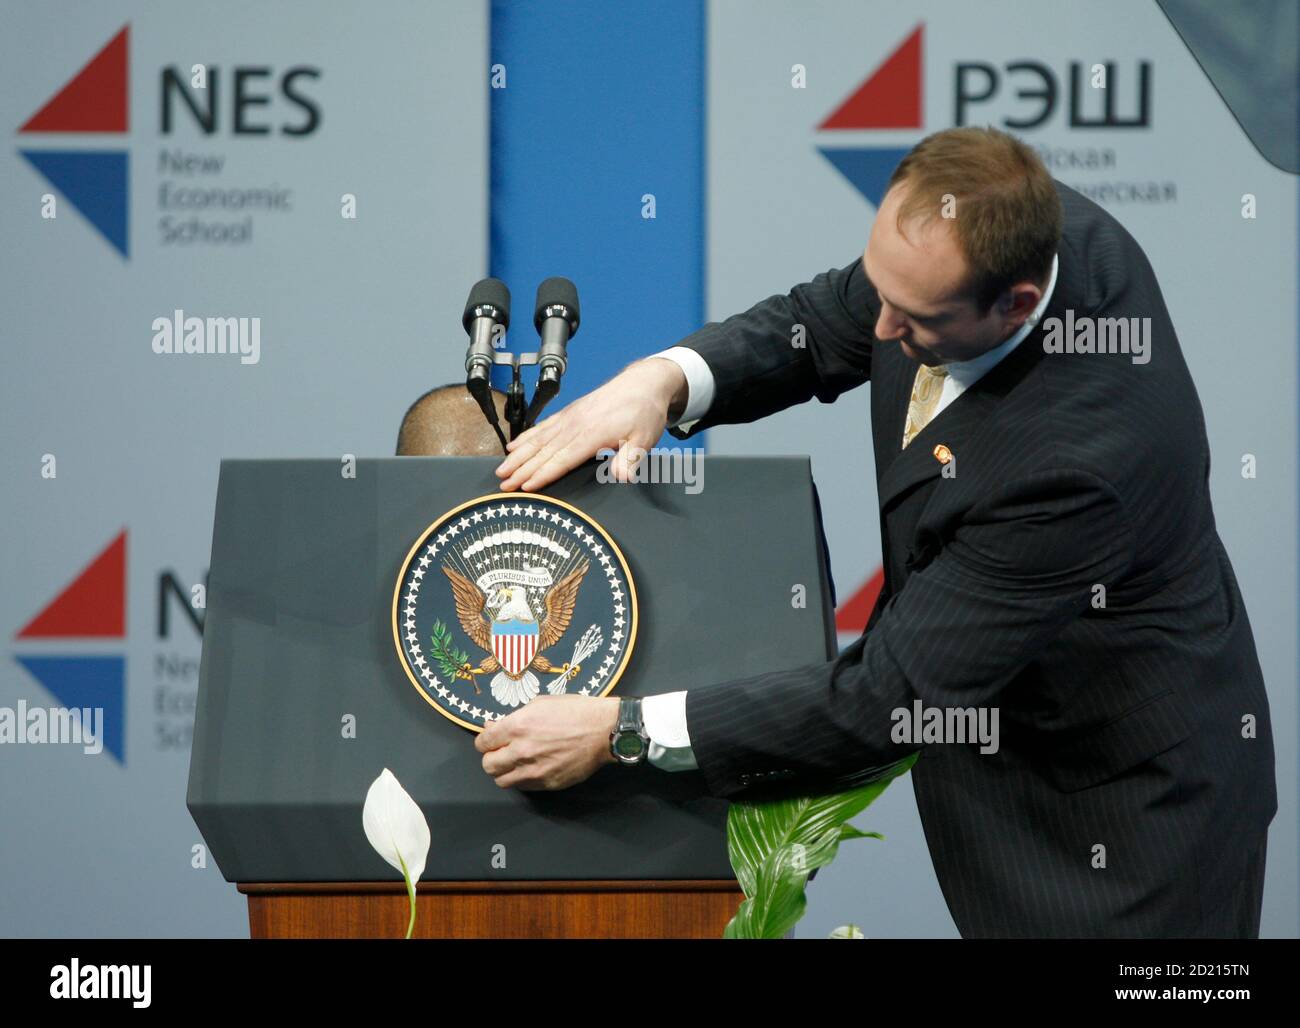 The Seal of the President of the United States is attached to the lecturn to be used by U.S. President Barack Obama to deliver the commencement address for the 2009 graduating class at the New Economic School in Moscow, July 7, 2009. REUTERS/Jason Reed    (RUSSIA POLITICS) Stock Photo